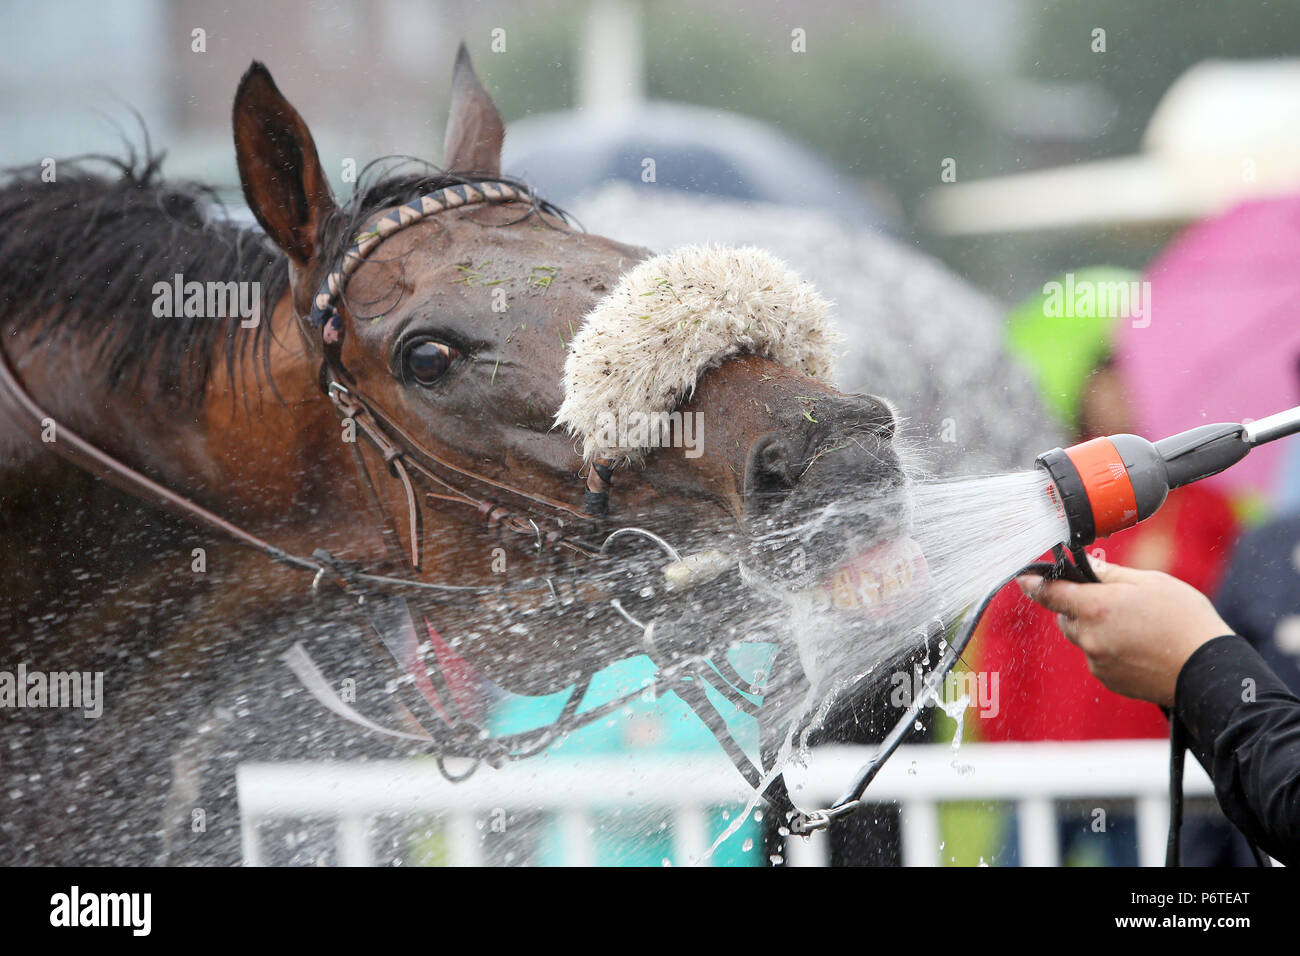 Hamburg, horse gets water from a shower head Stock Photo